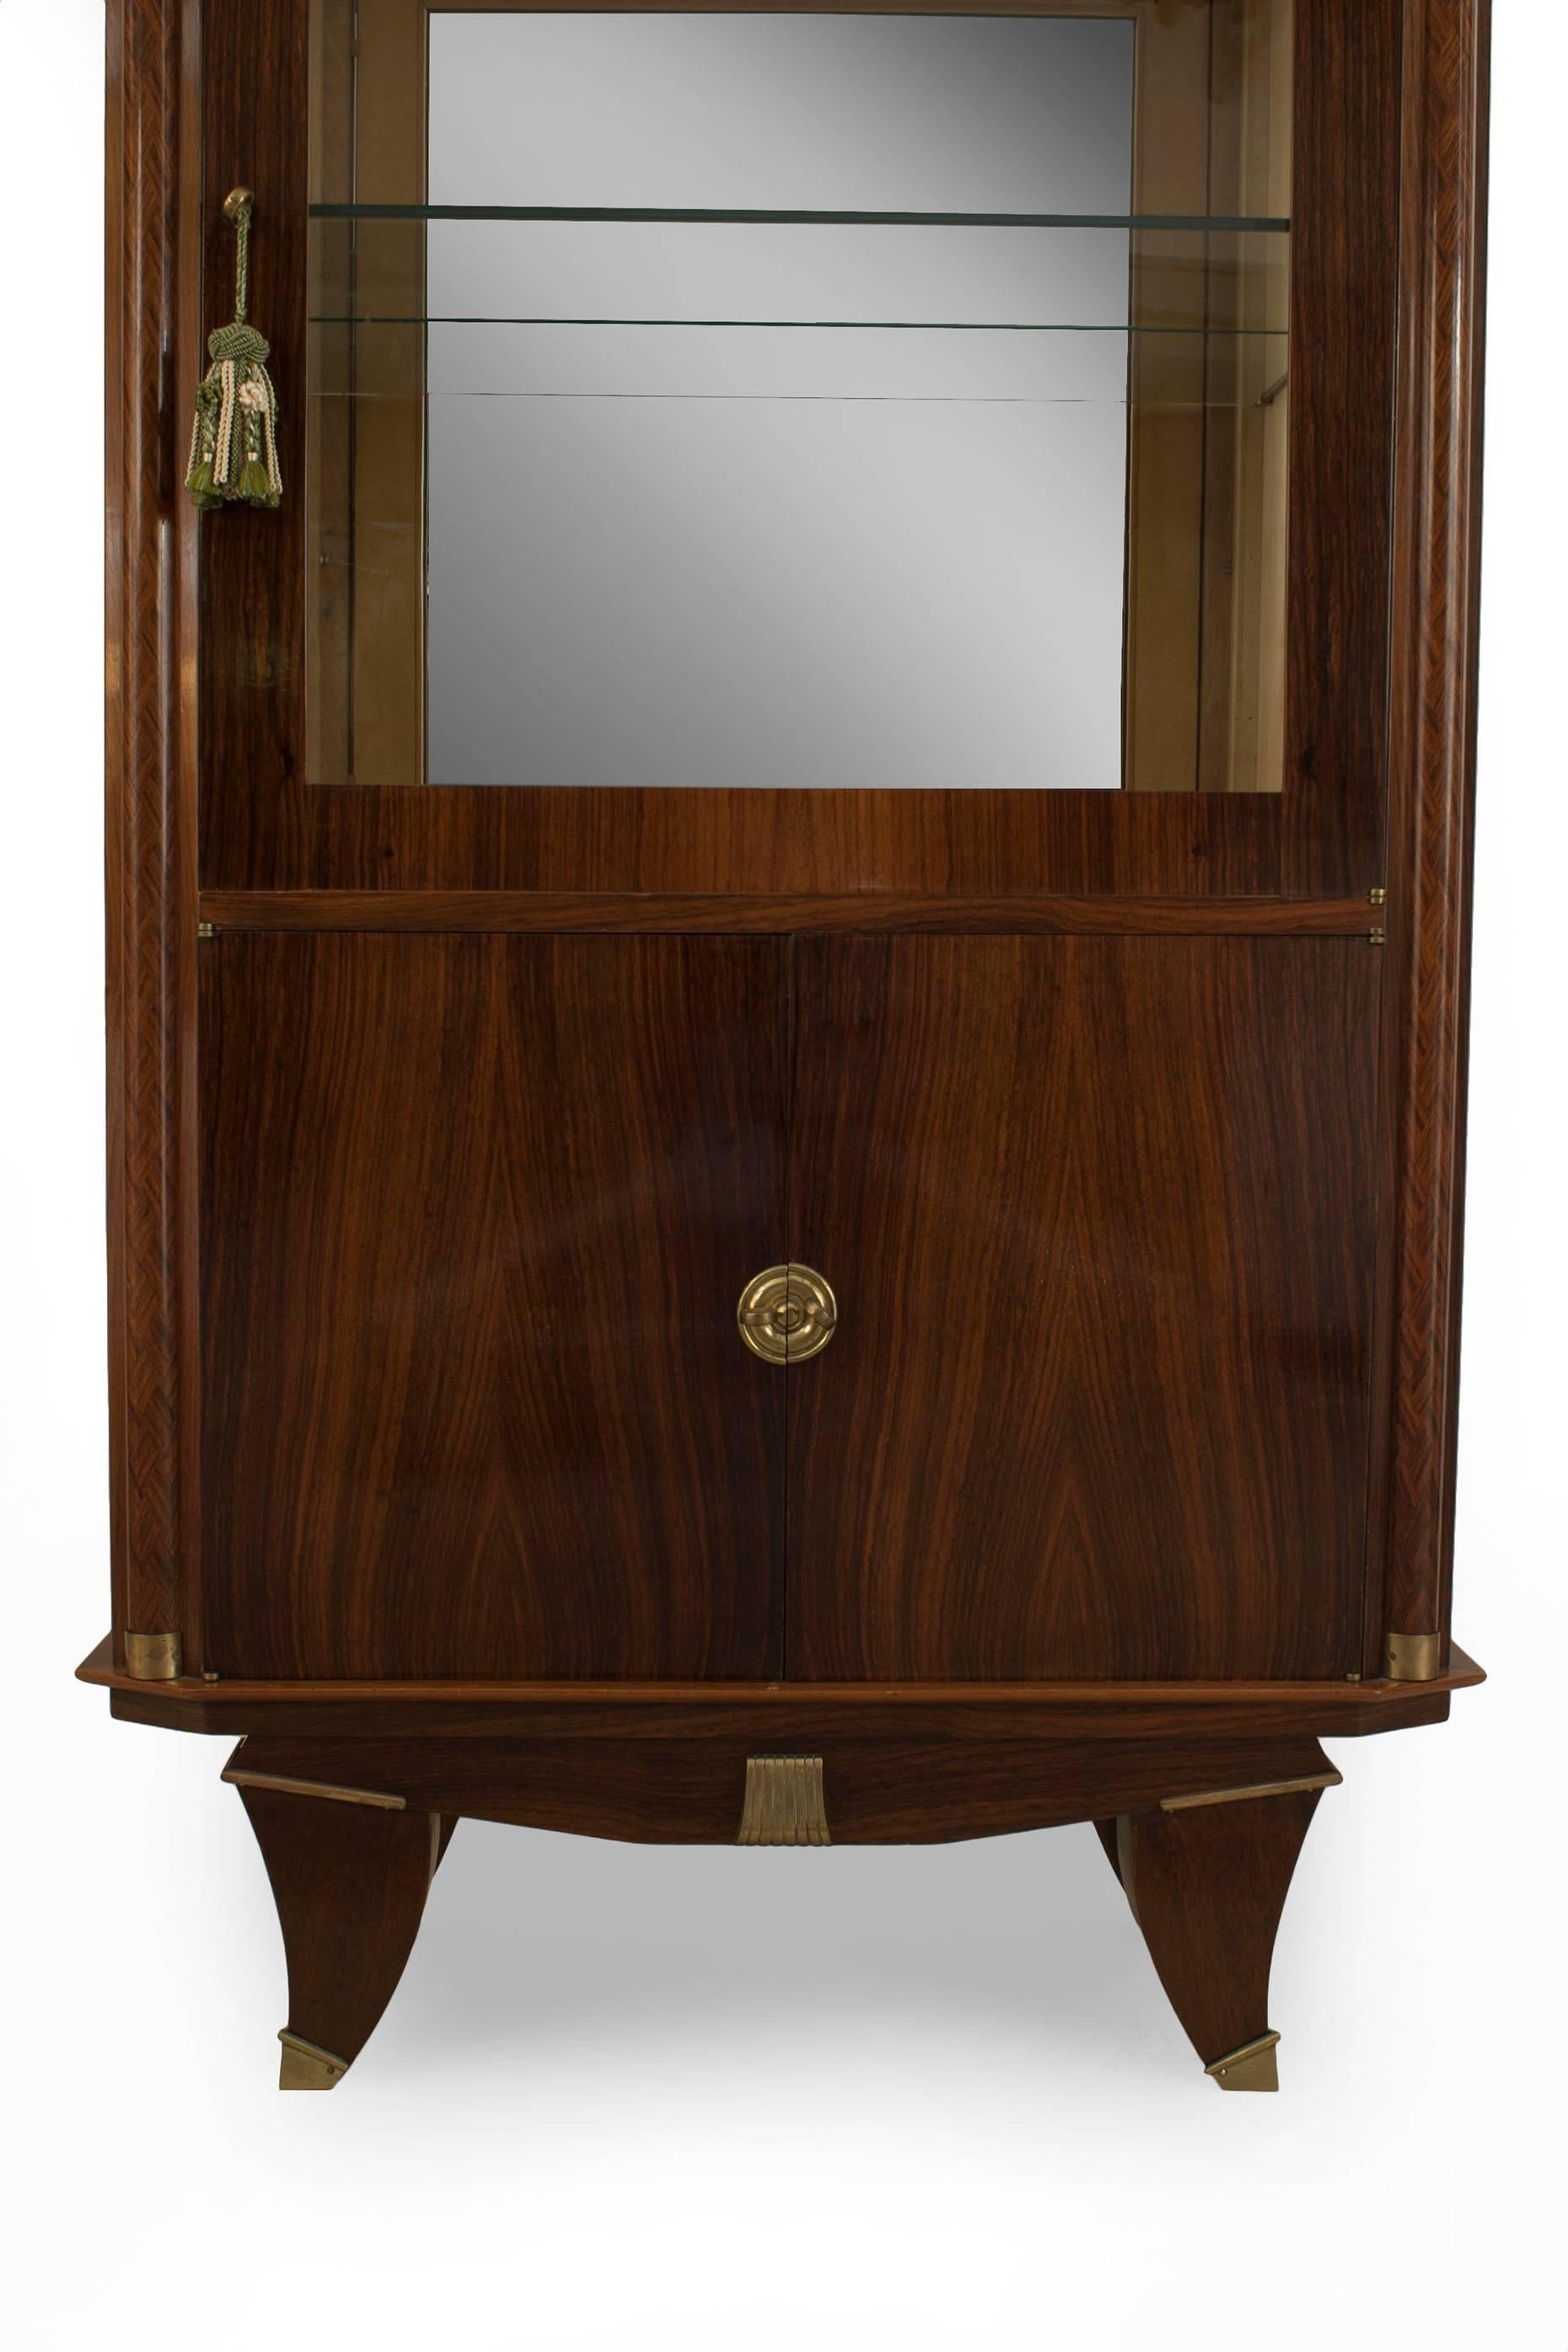 French Art Deco palisander wood display vitrine cabinet with a glass door above a Pair of doors with bronze trim and geometric inlaid round column sides
